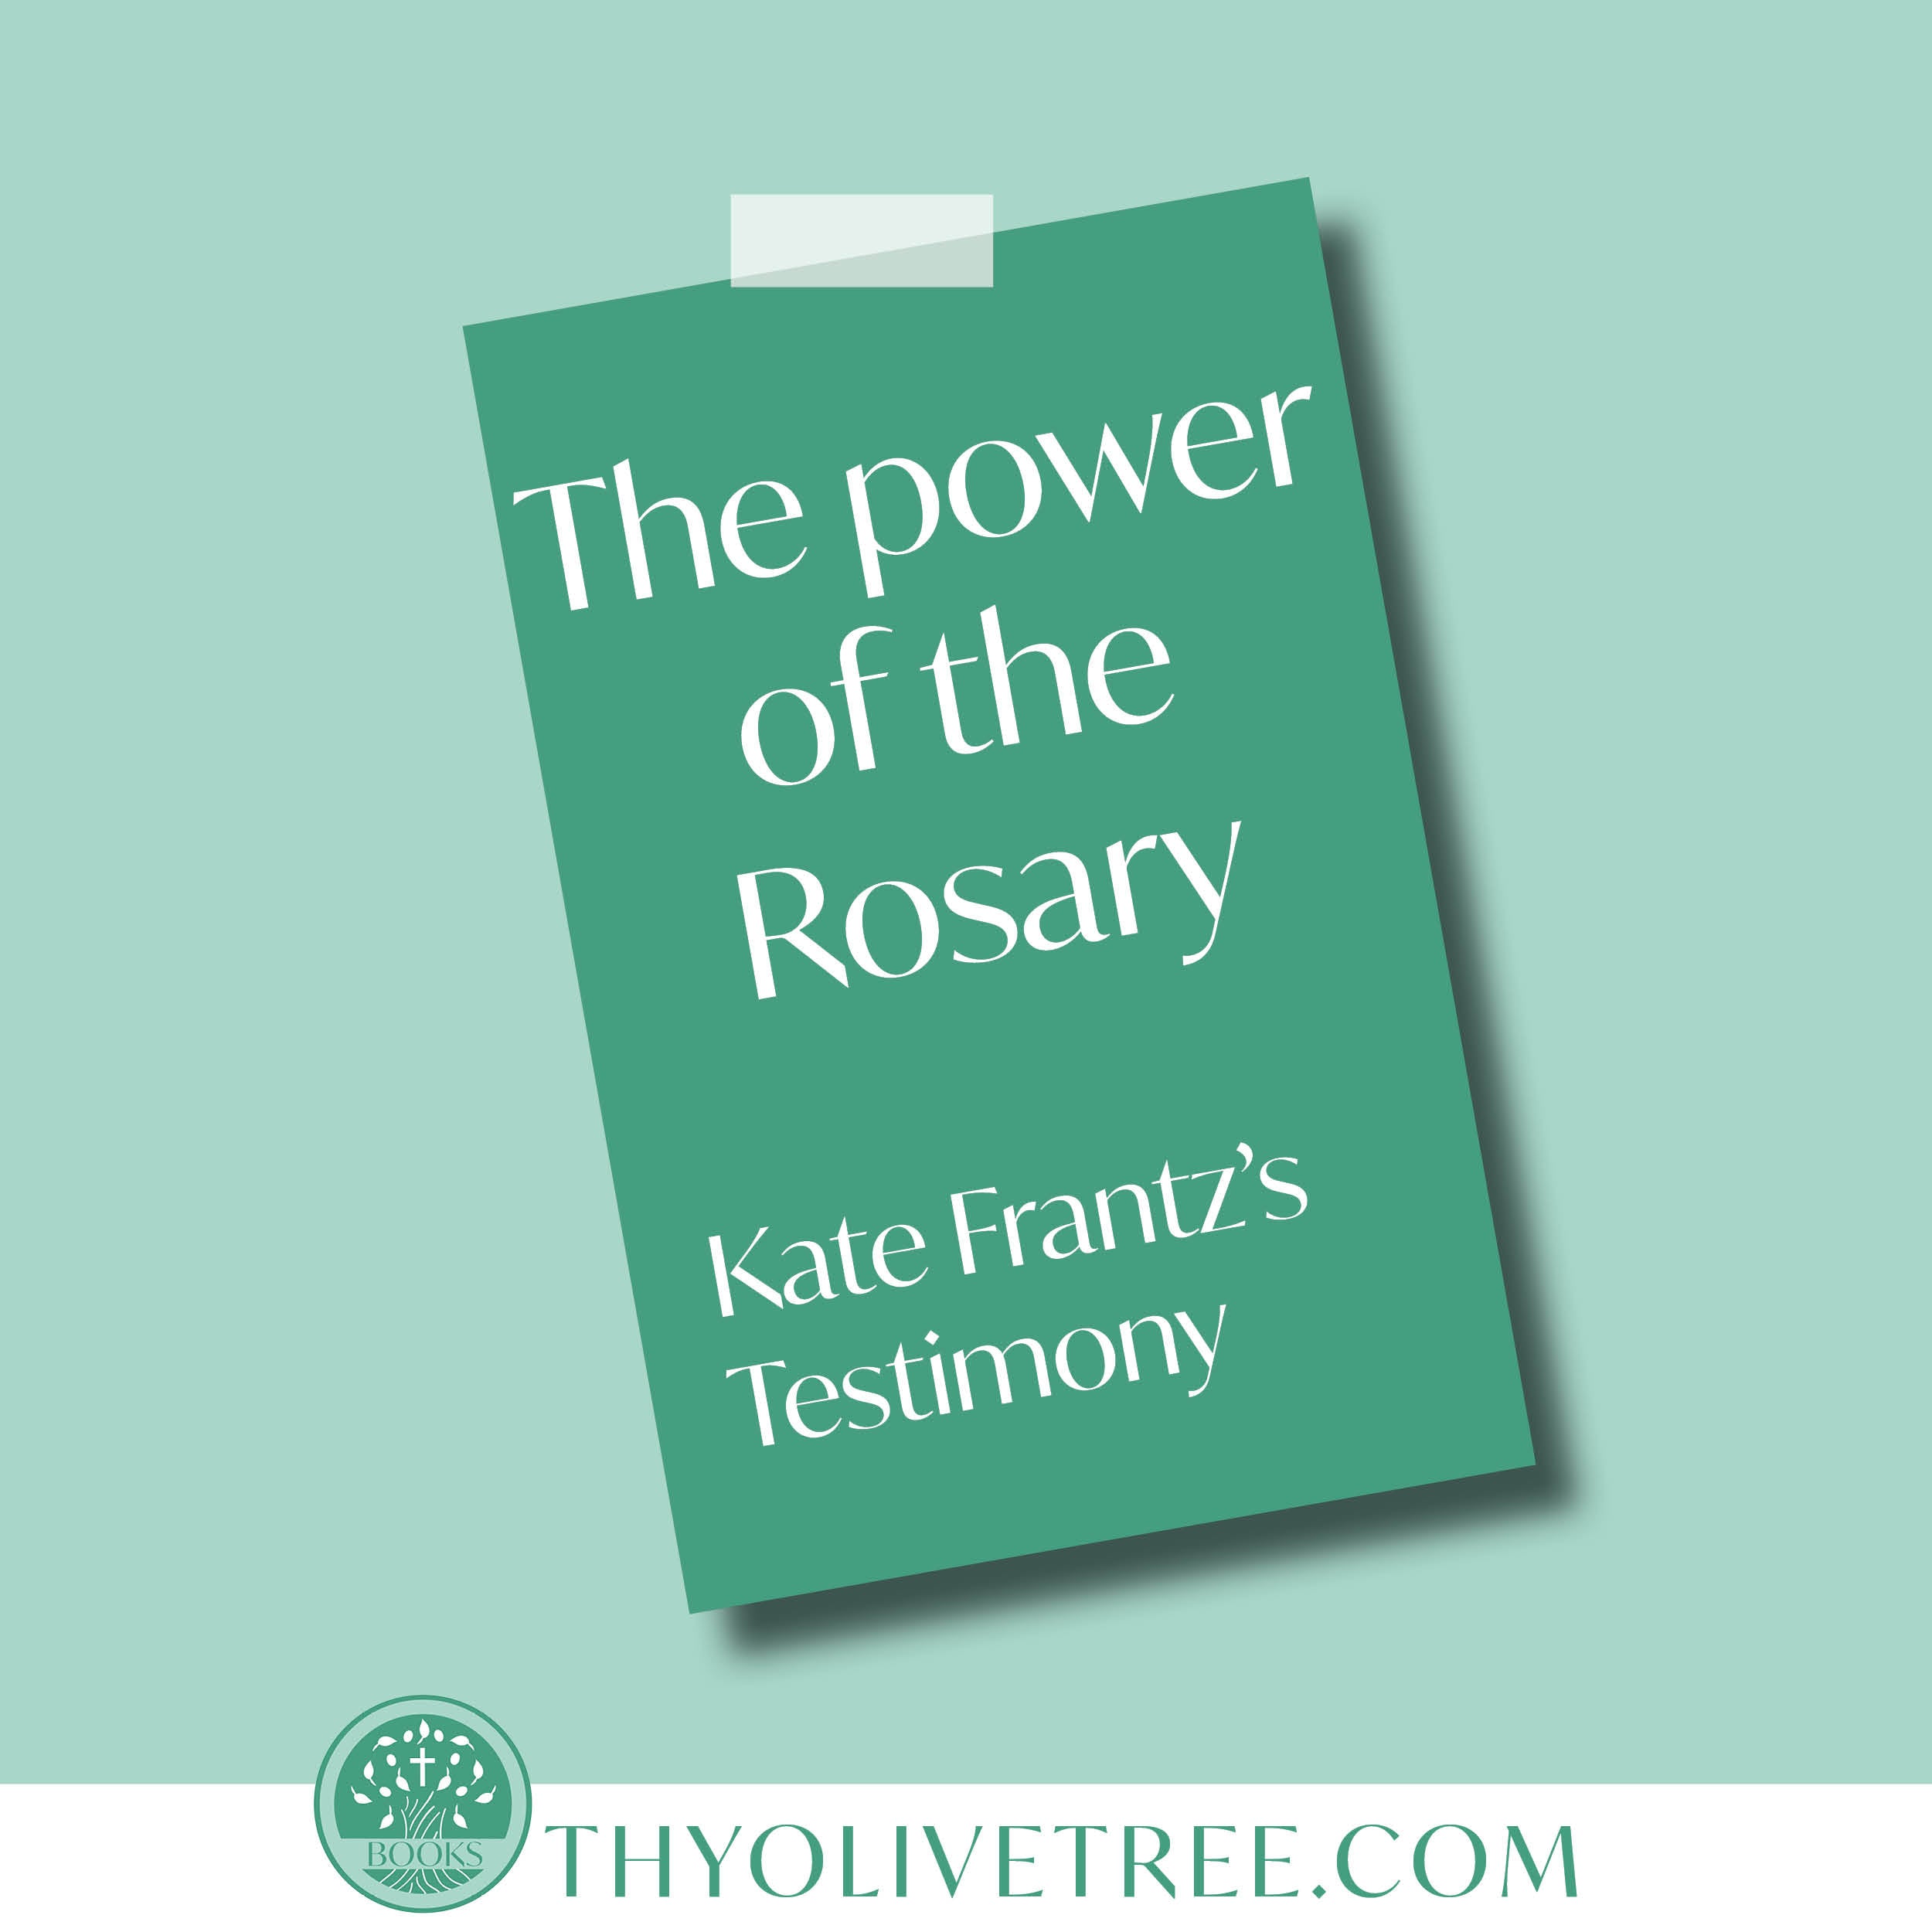 The power of the Rosary testimony